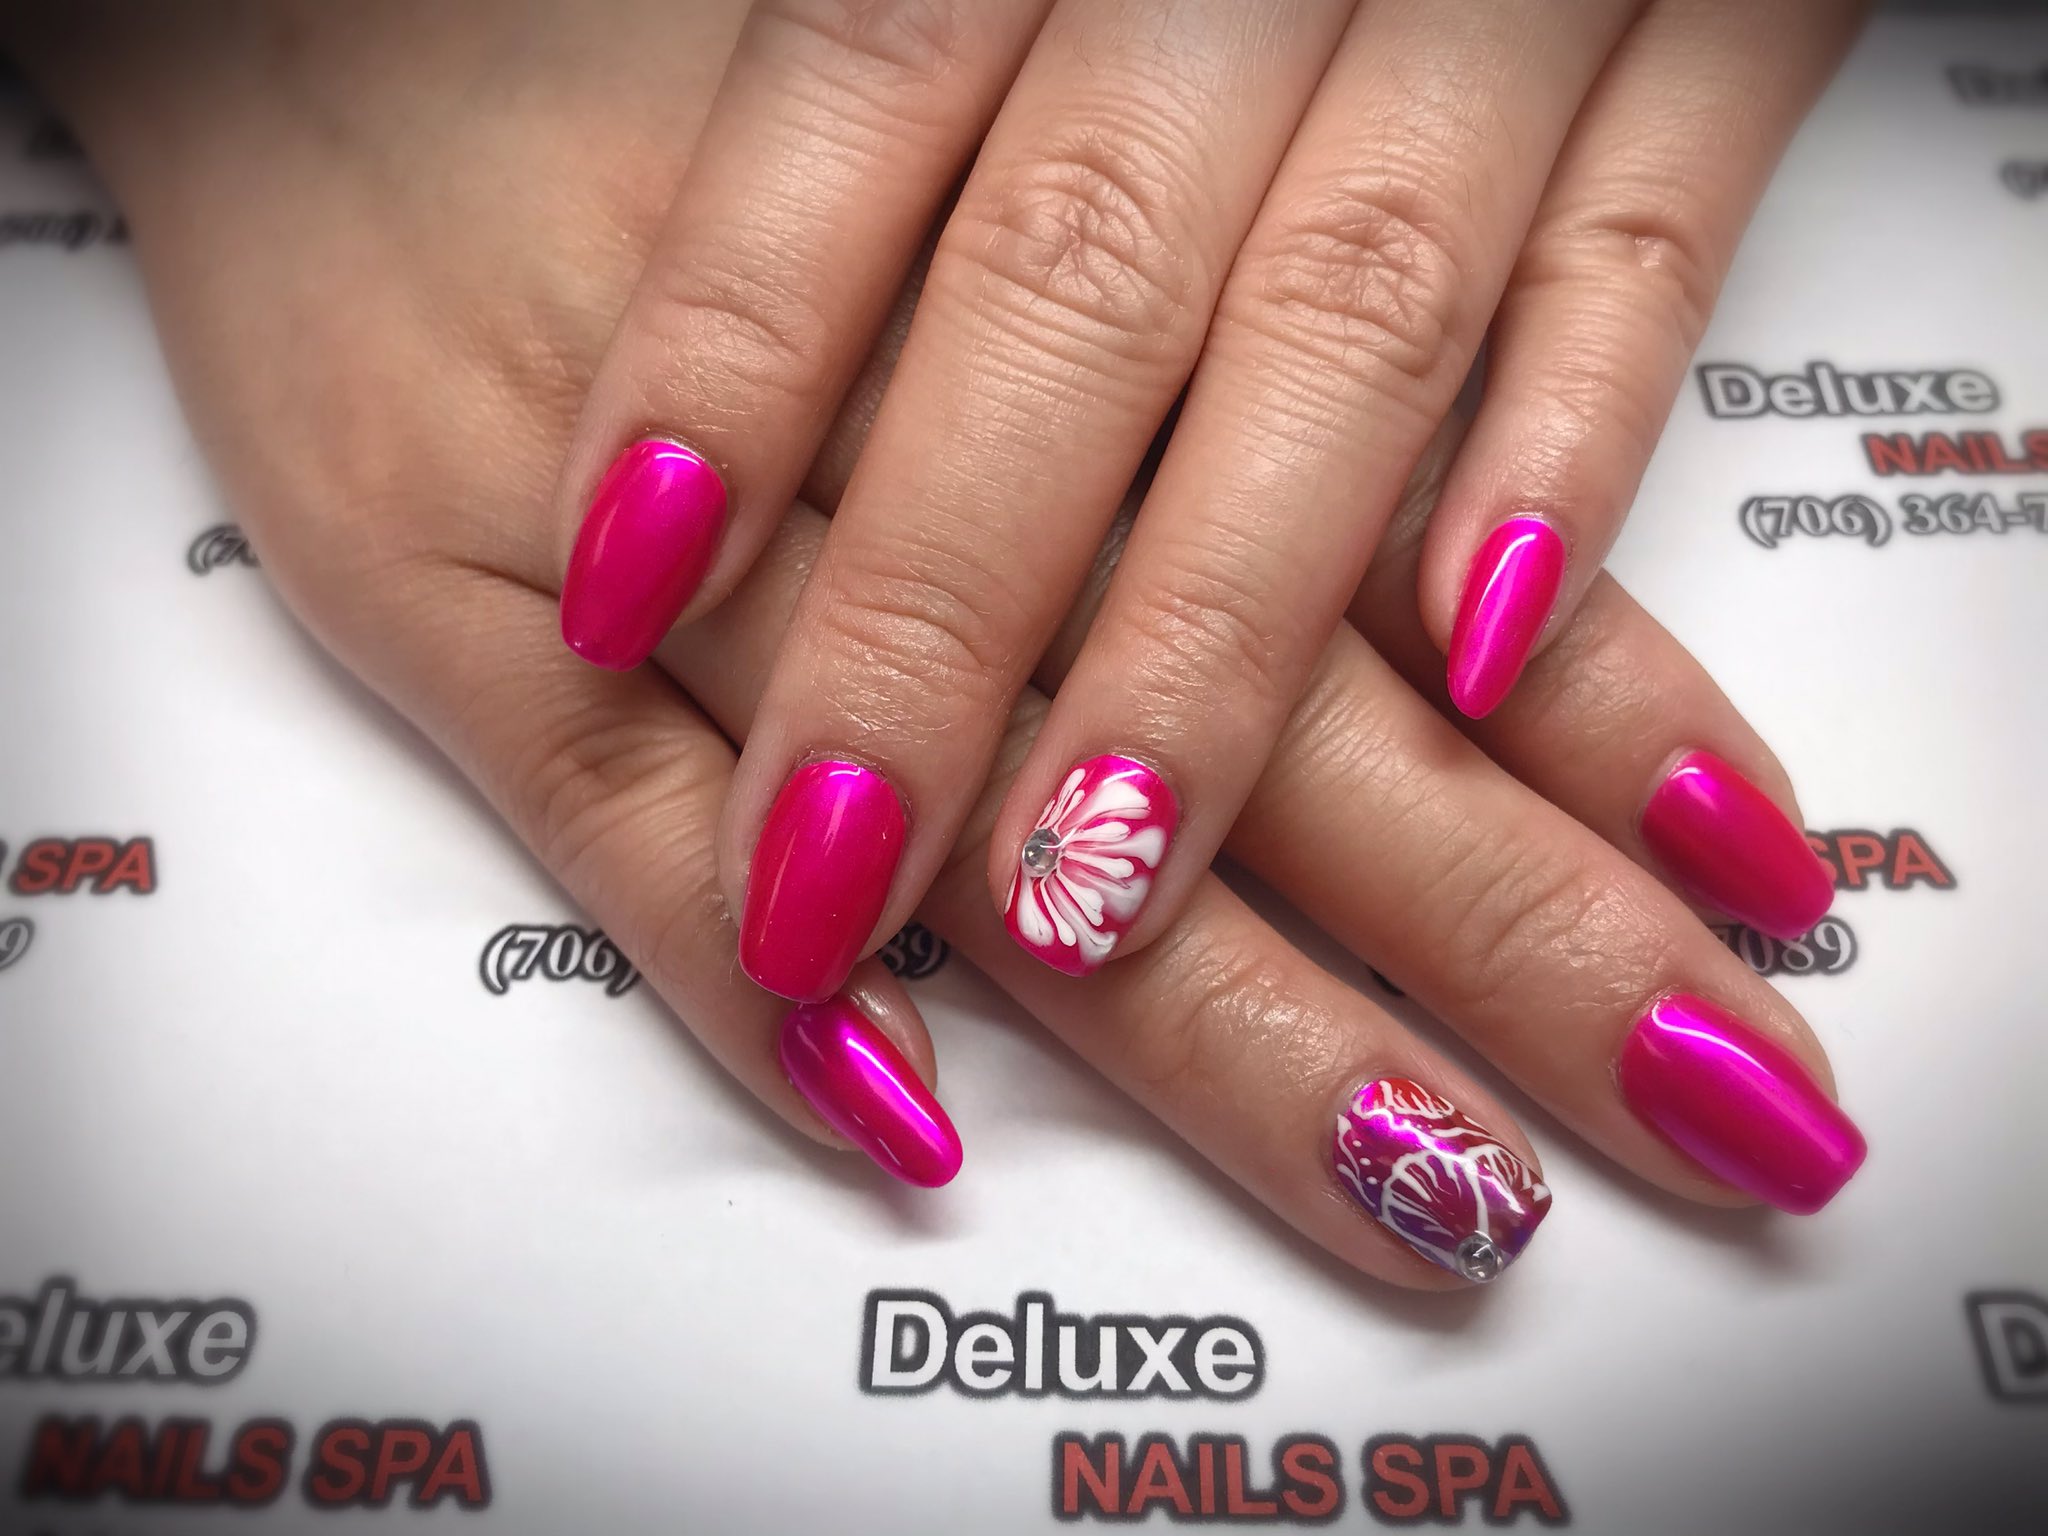 Deluxe Nails and Spa 2: Read Reviews and Book Classes on ClassPass